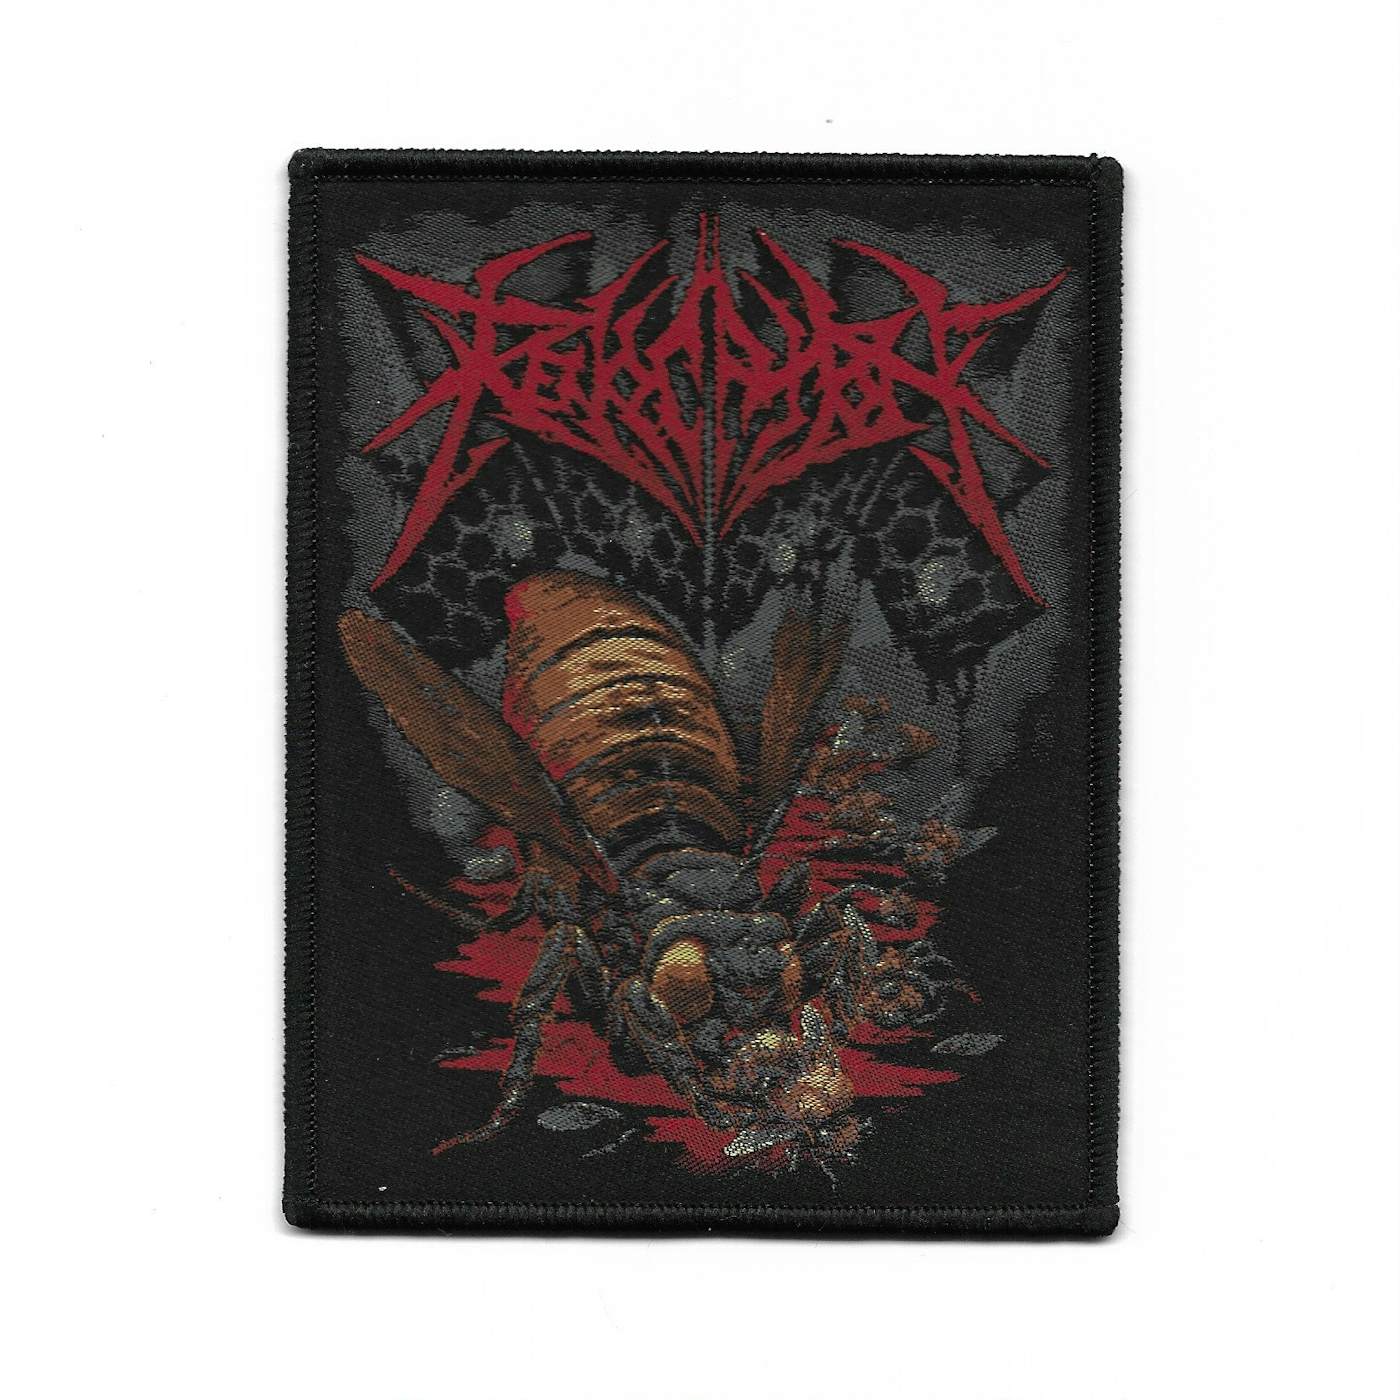 Revocation "The Hive" Patch